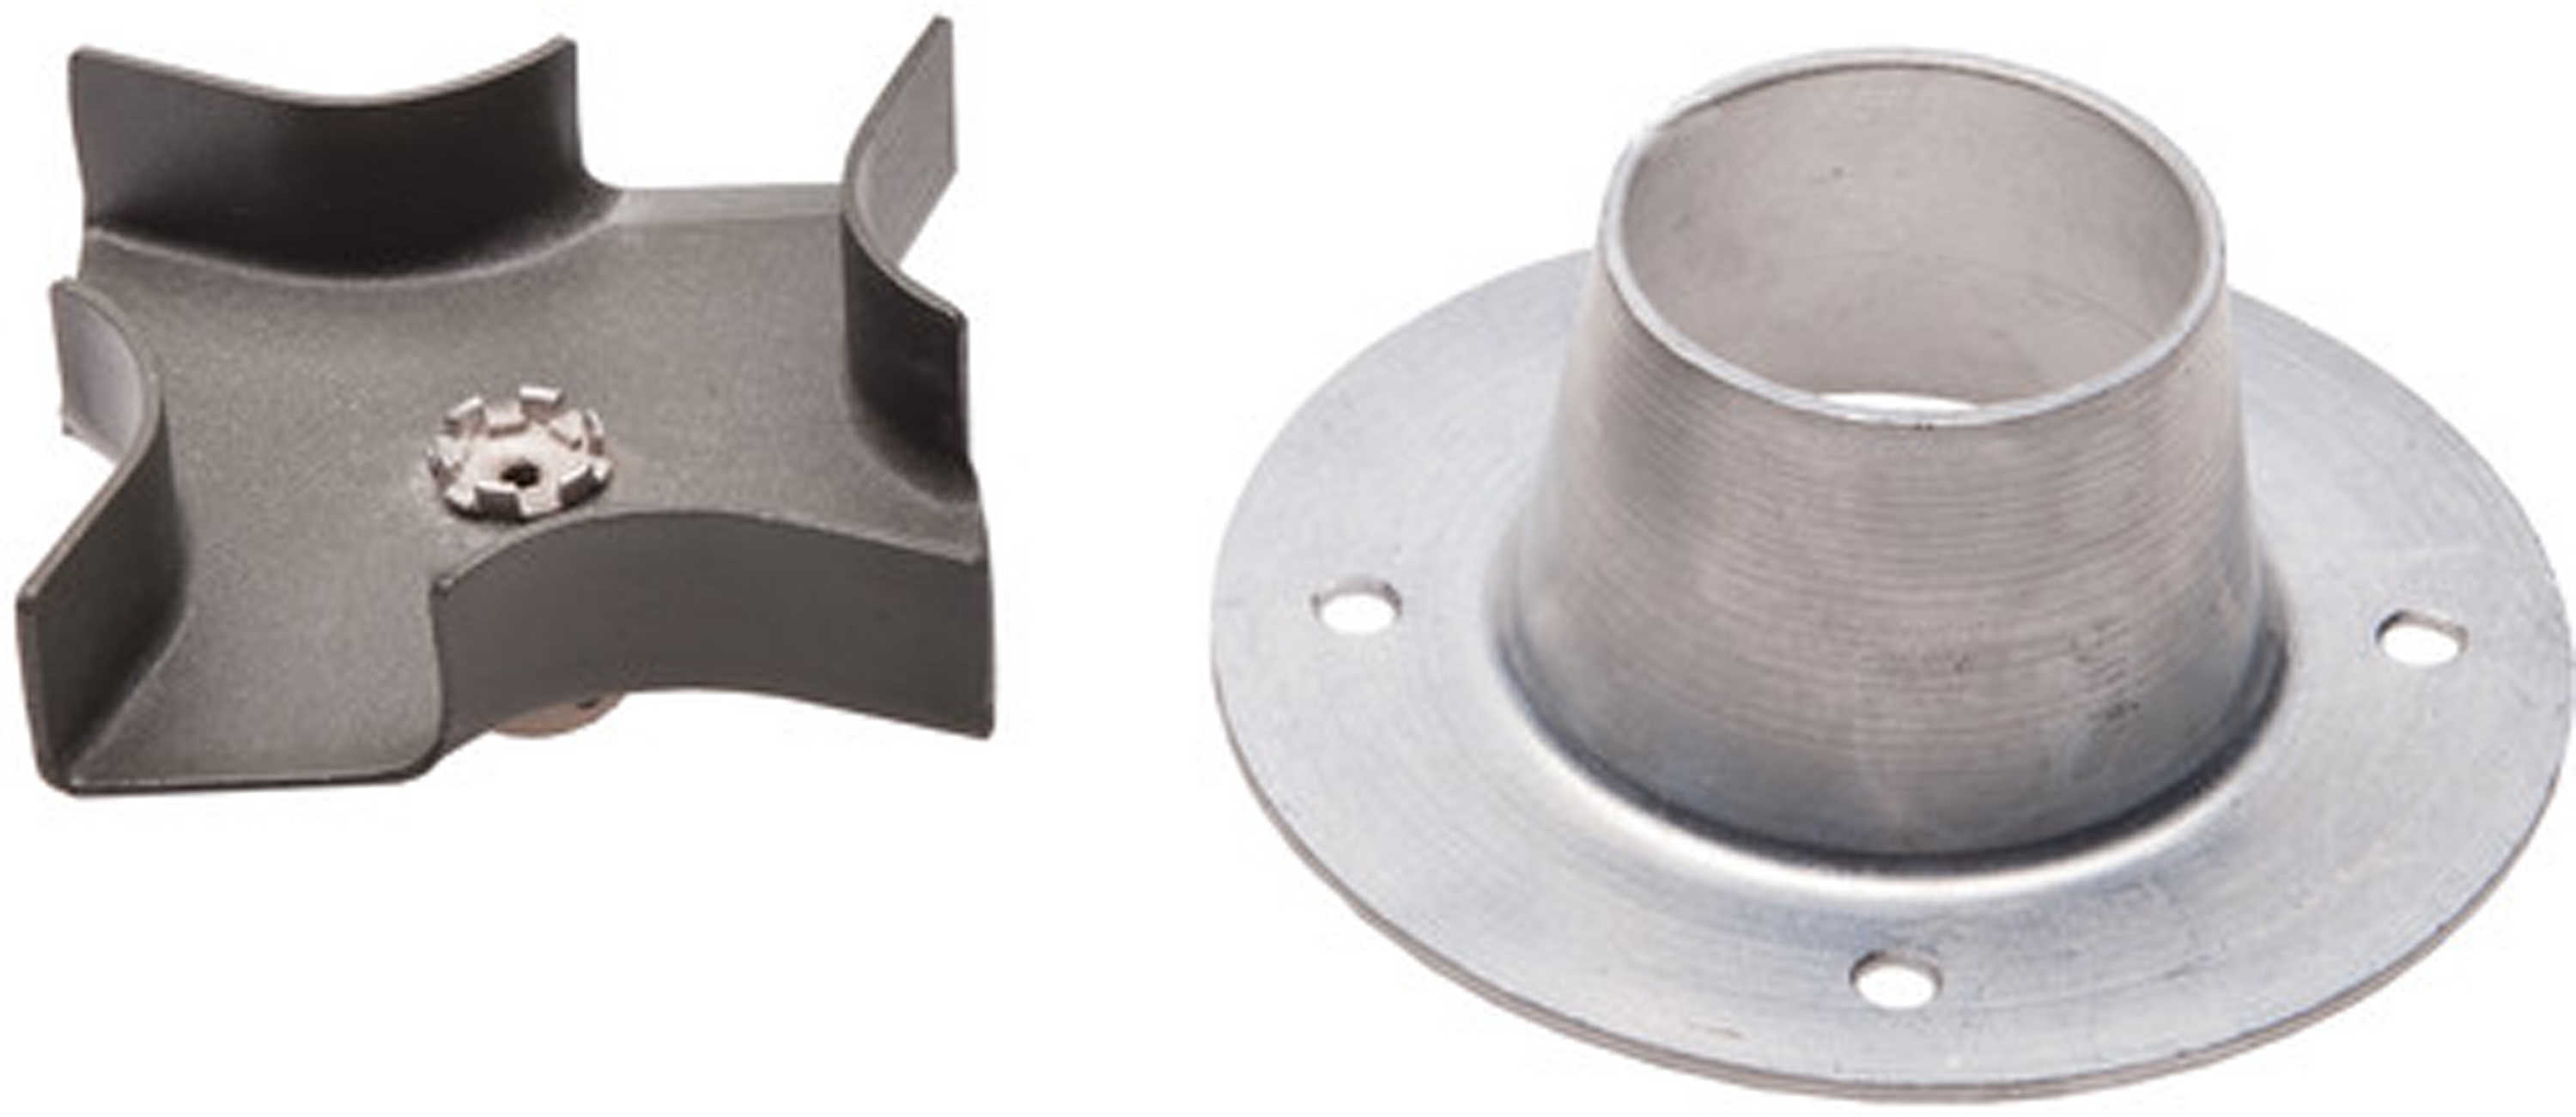 Metal Spin Plate And Funnel Kit Md: MFA-13103